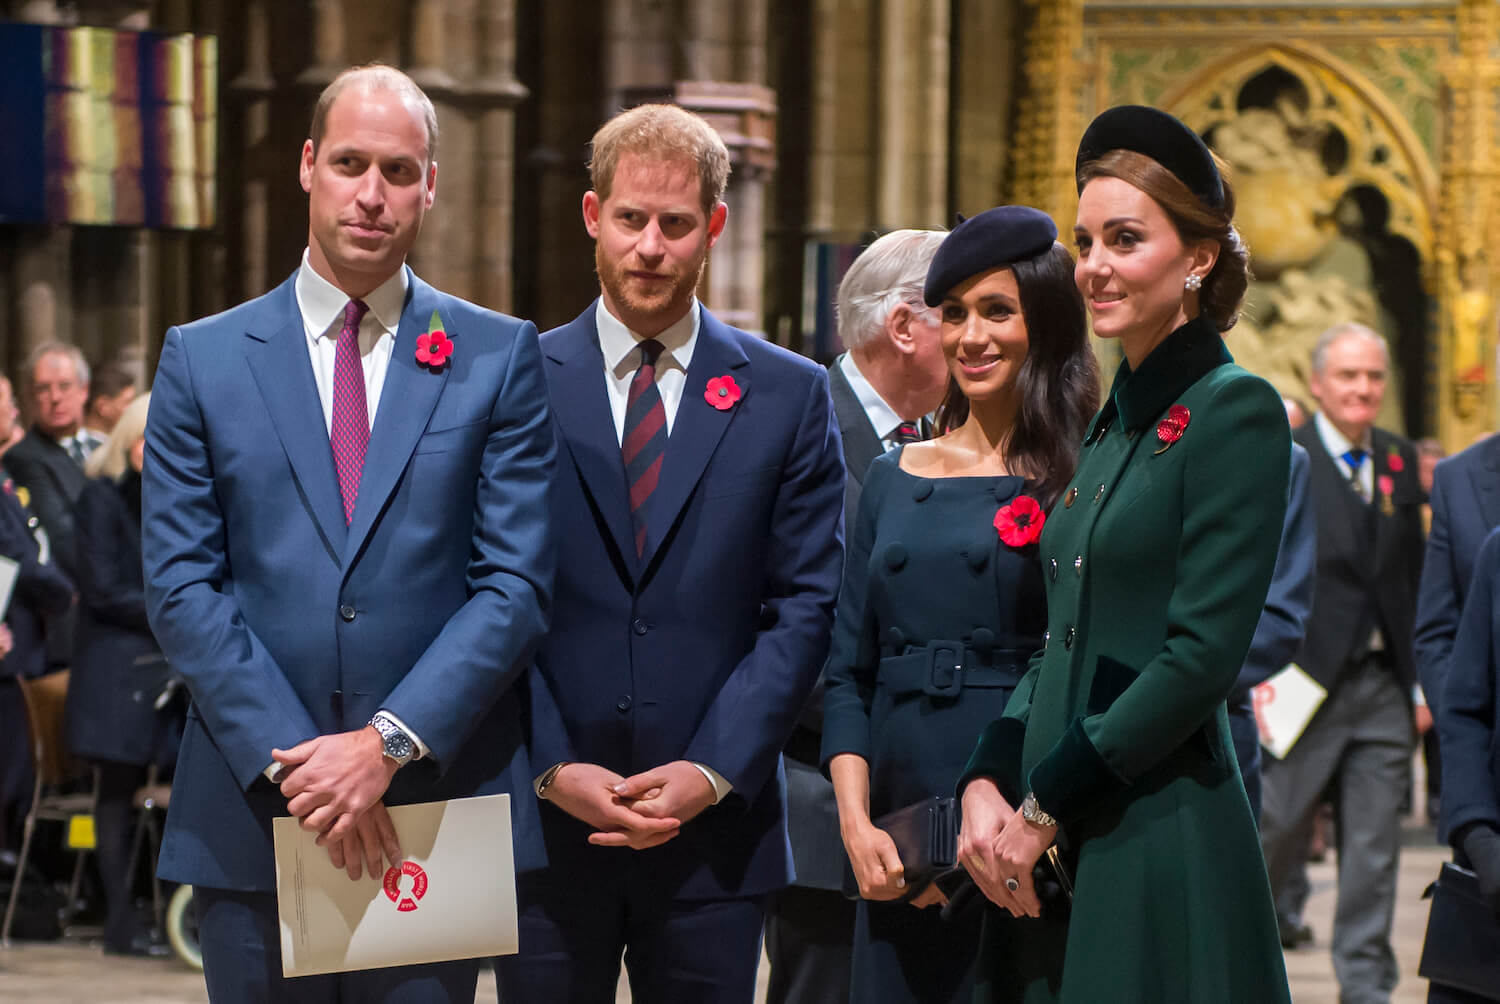 Prince William and Prince Harry wear blue suits and stand next to each other with wives Meghan Markle and Kate Middleton